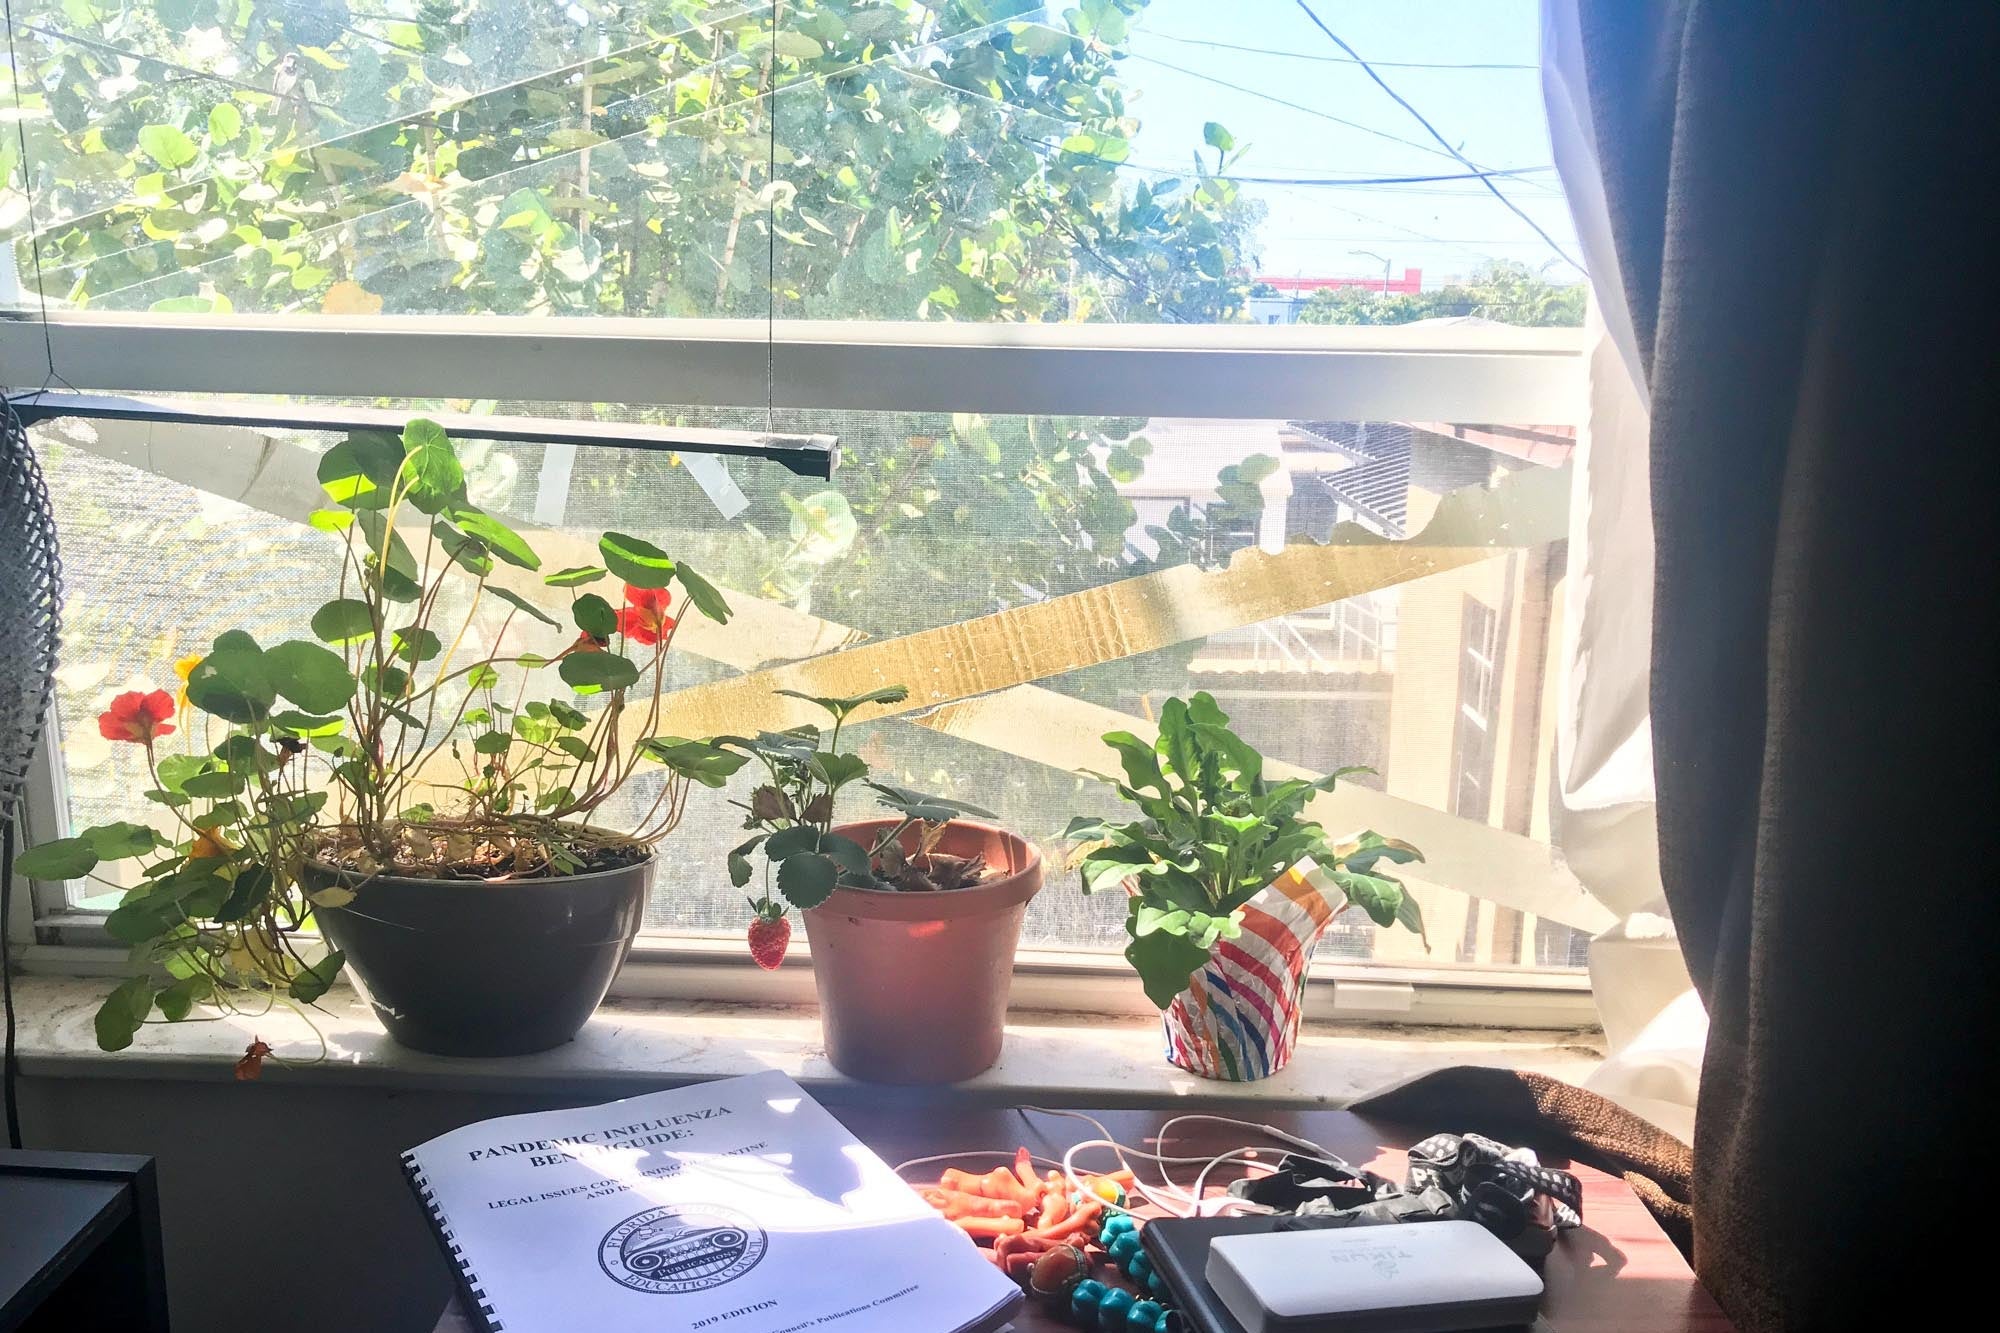 Plants in front of a sunny window.